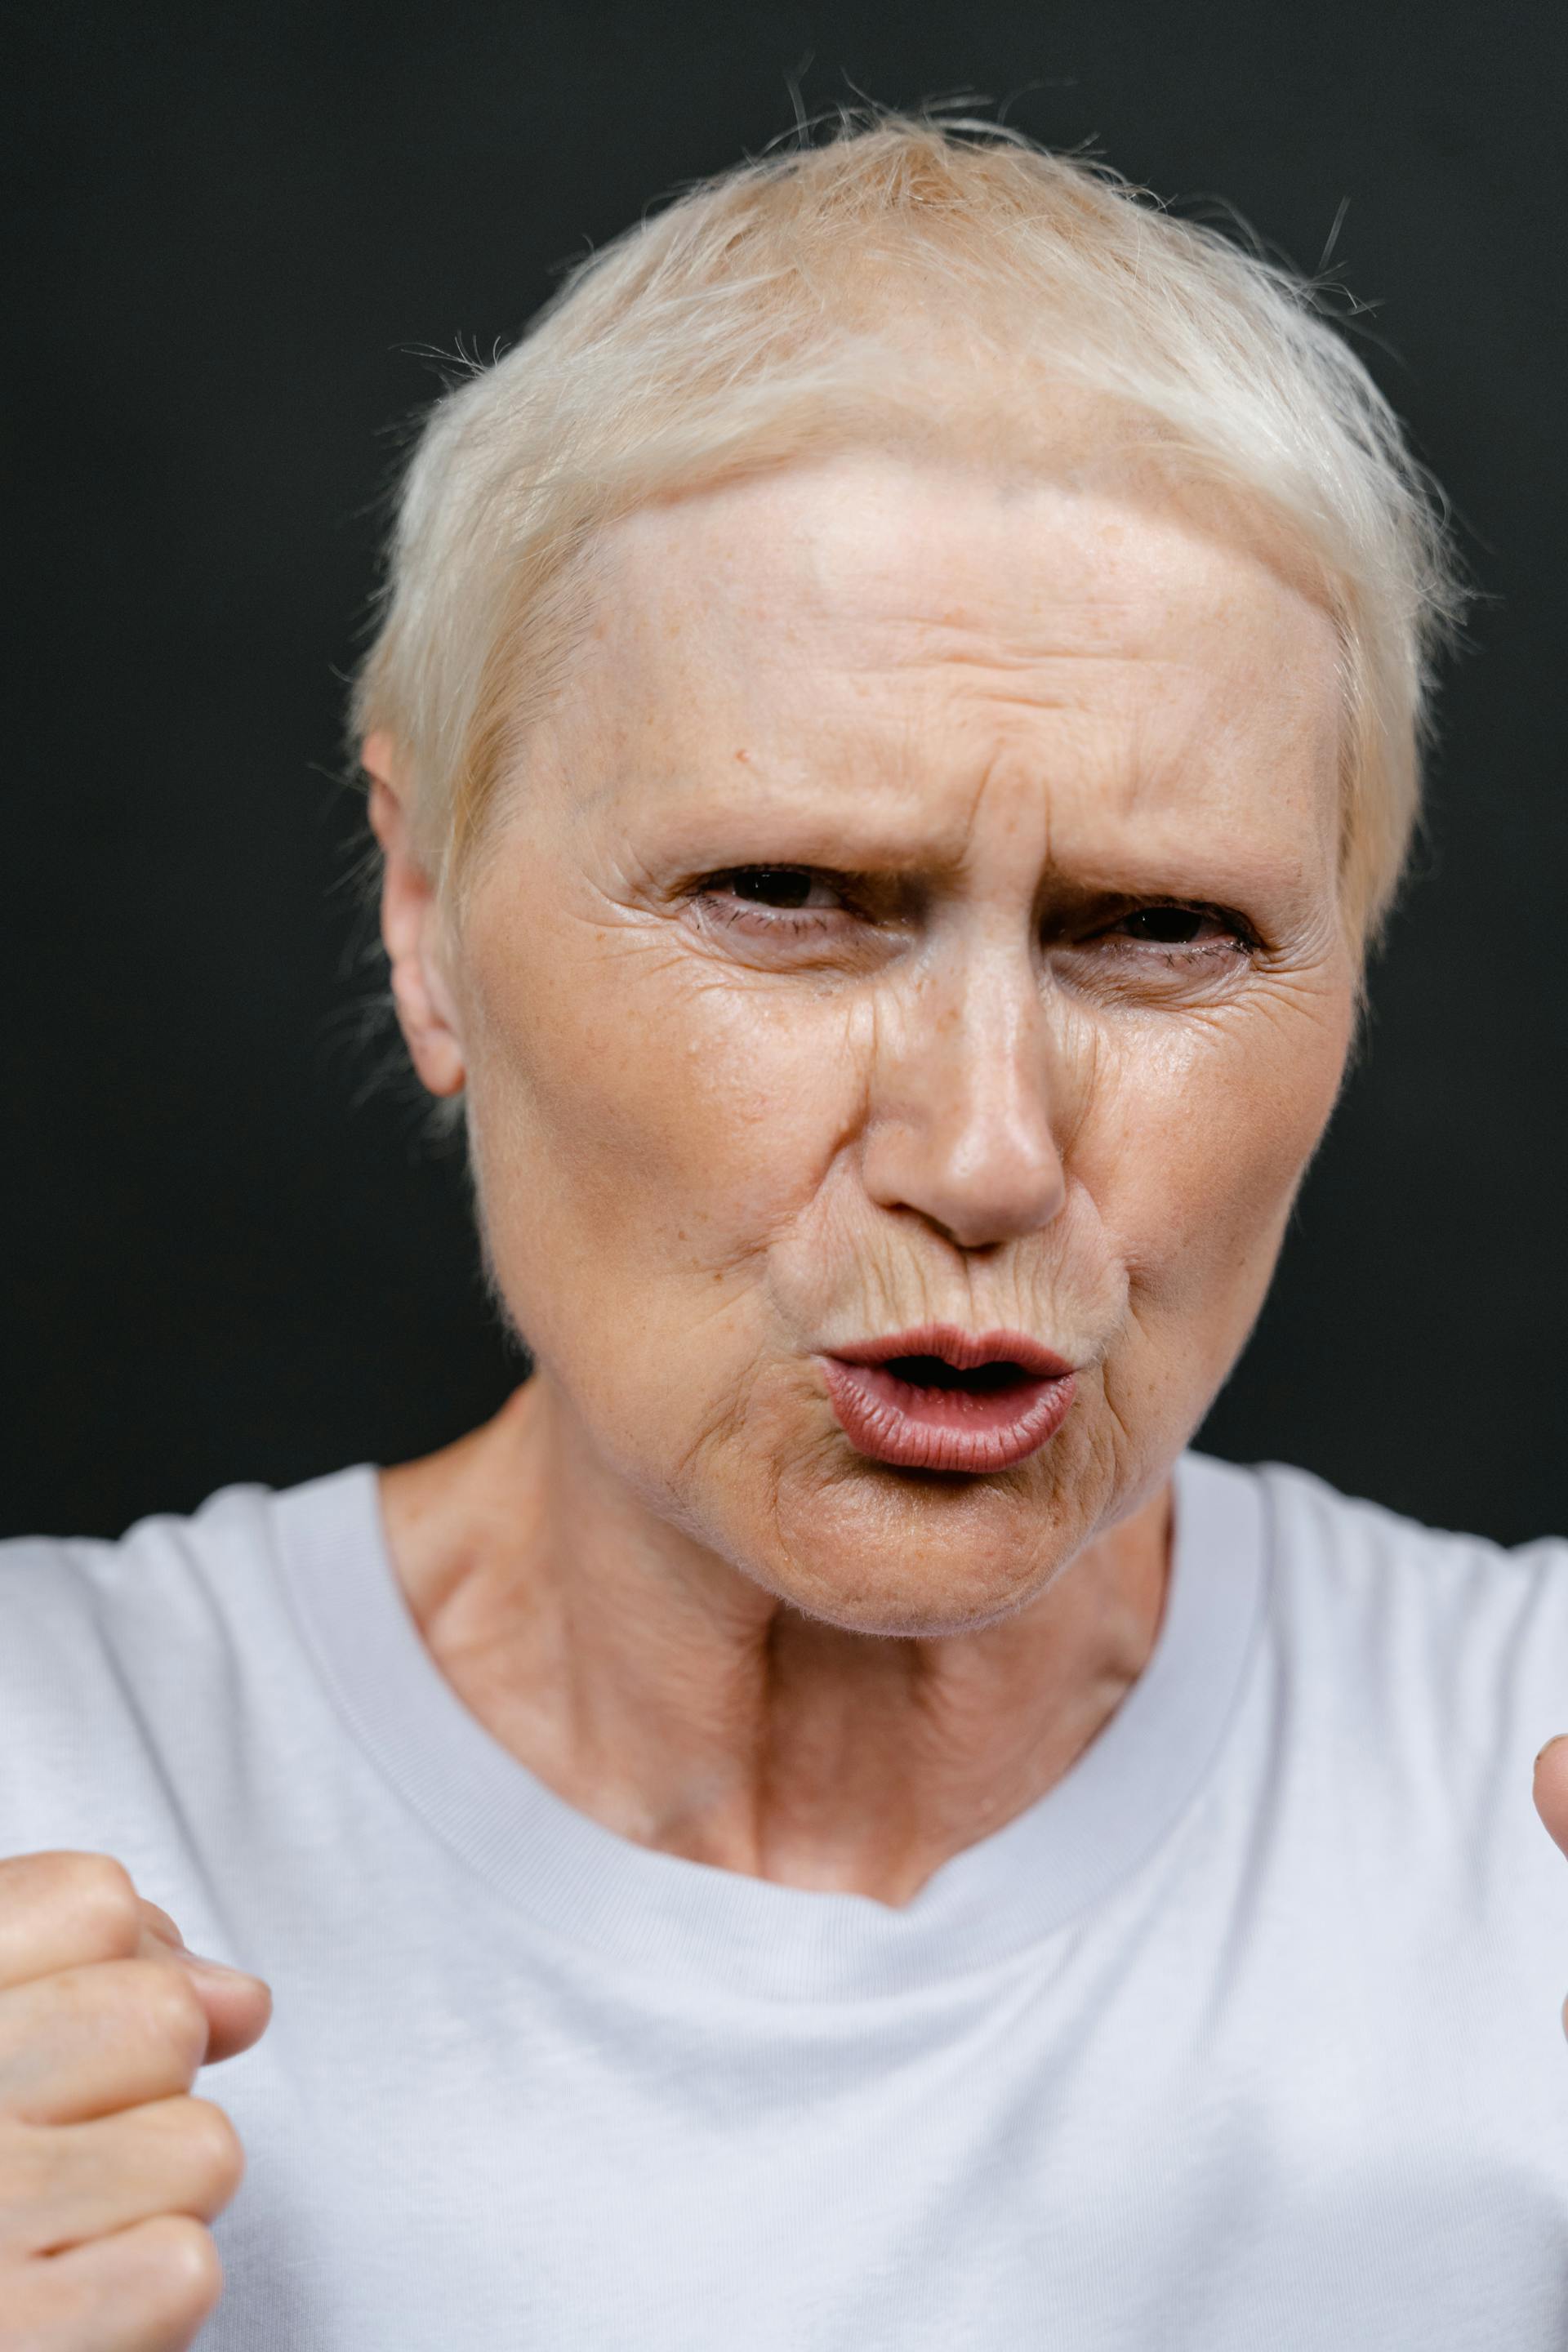 An angry mature woman | Source: Pexels